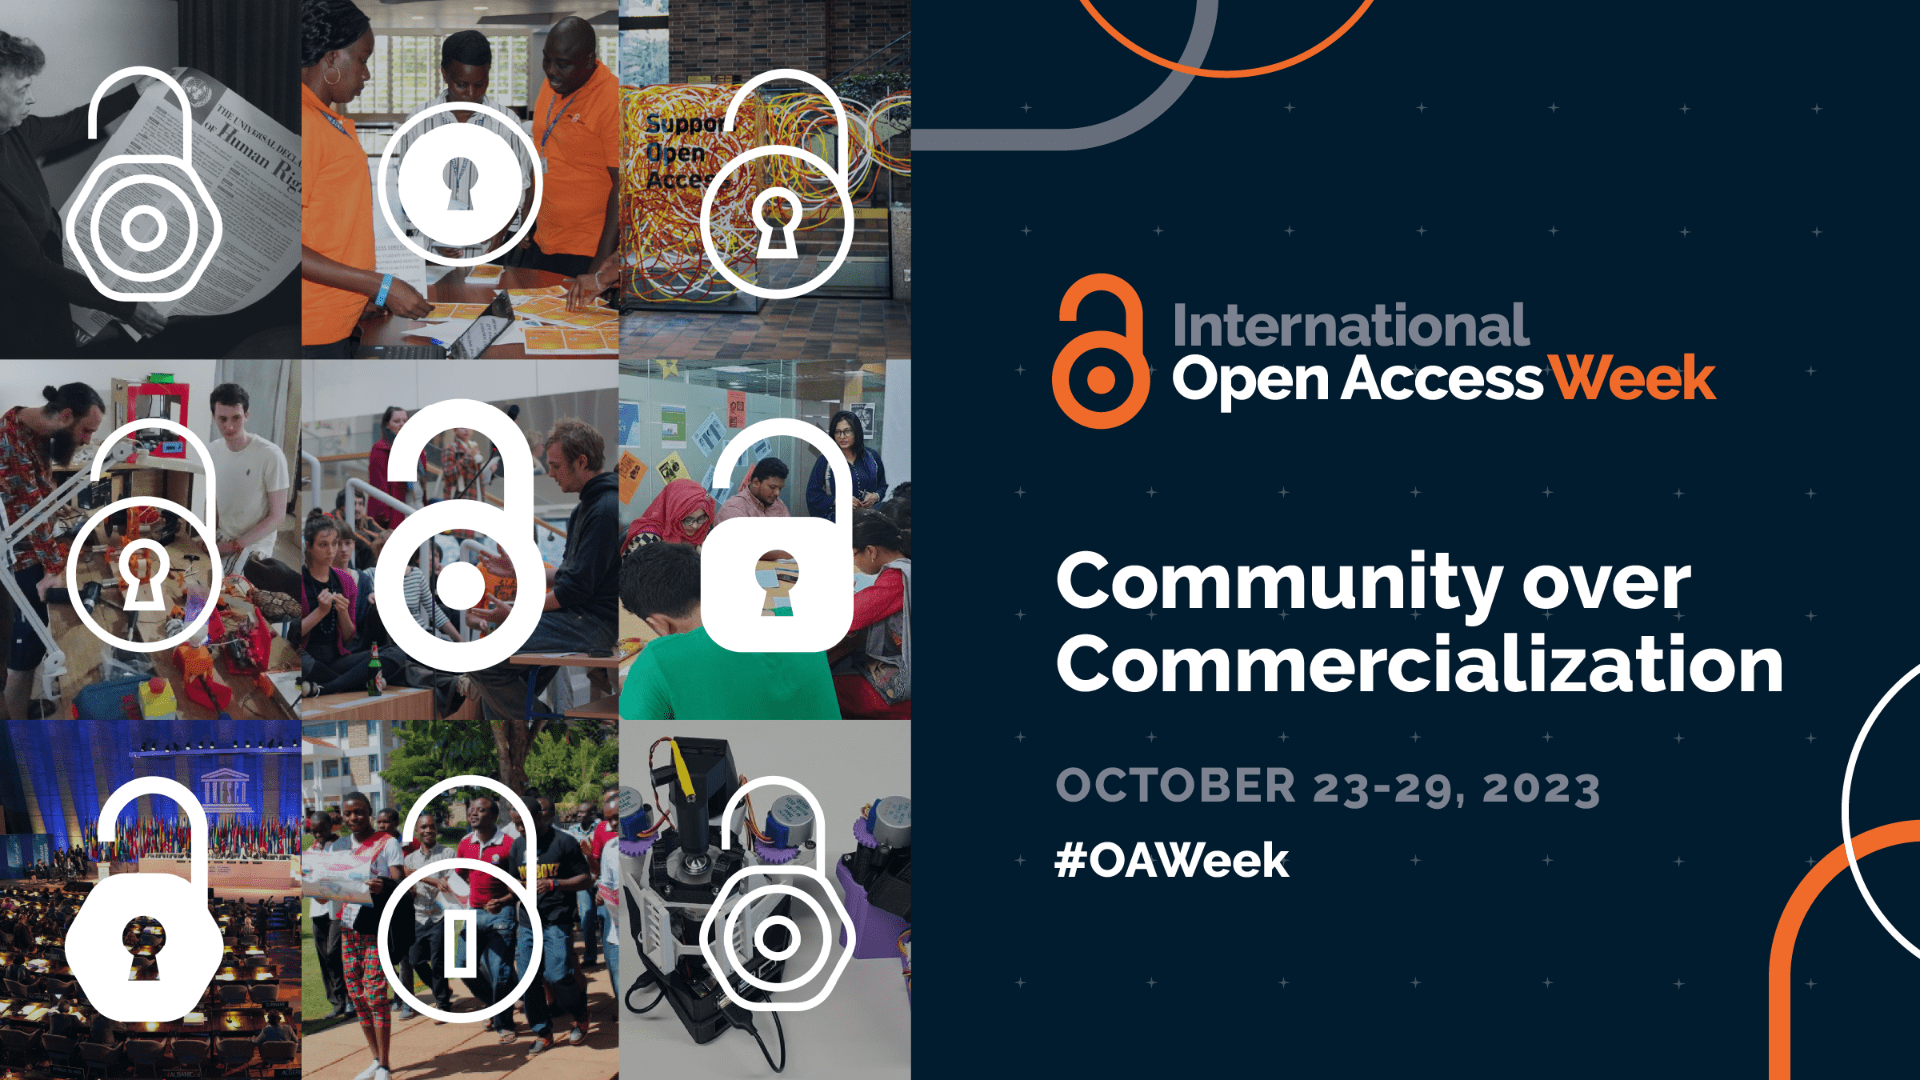 International Open Access Week promotional image. Community over commercialisation. Nine tiled images showing community interaction overlaid with open access logo open locks.